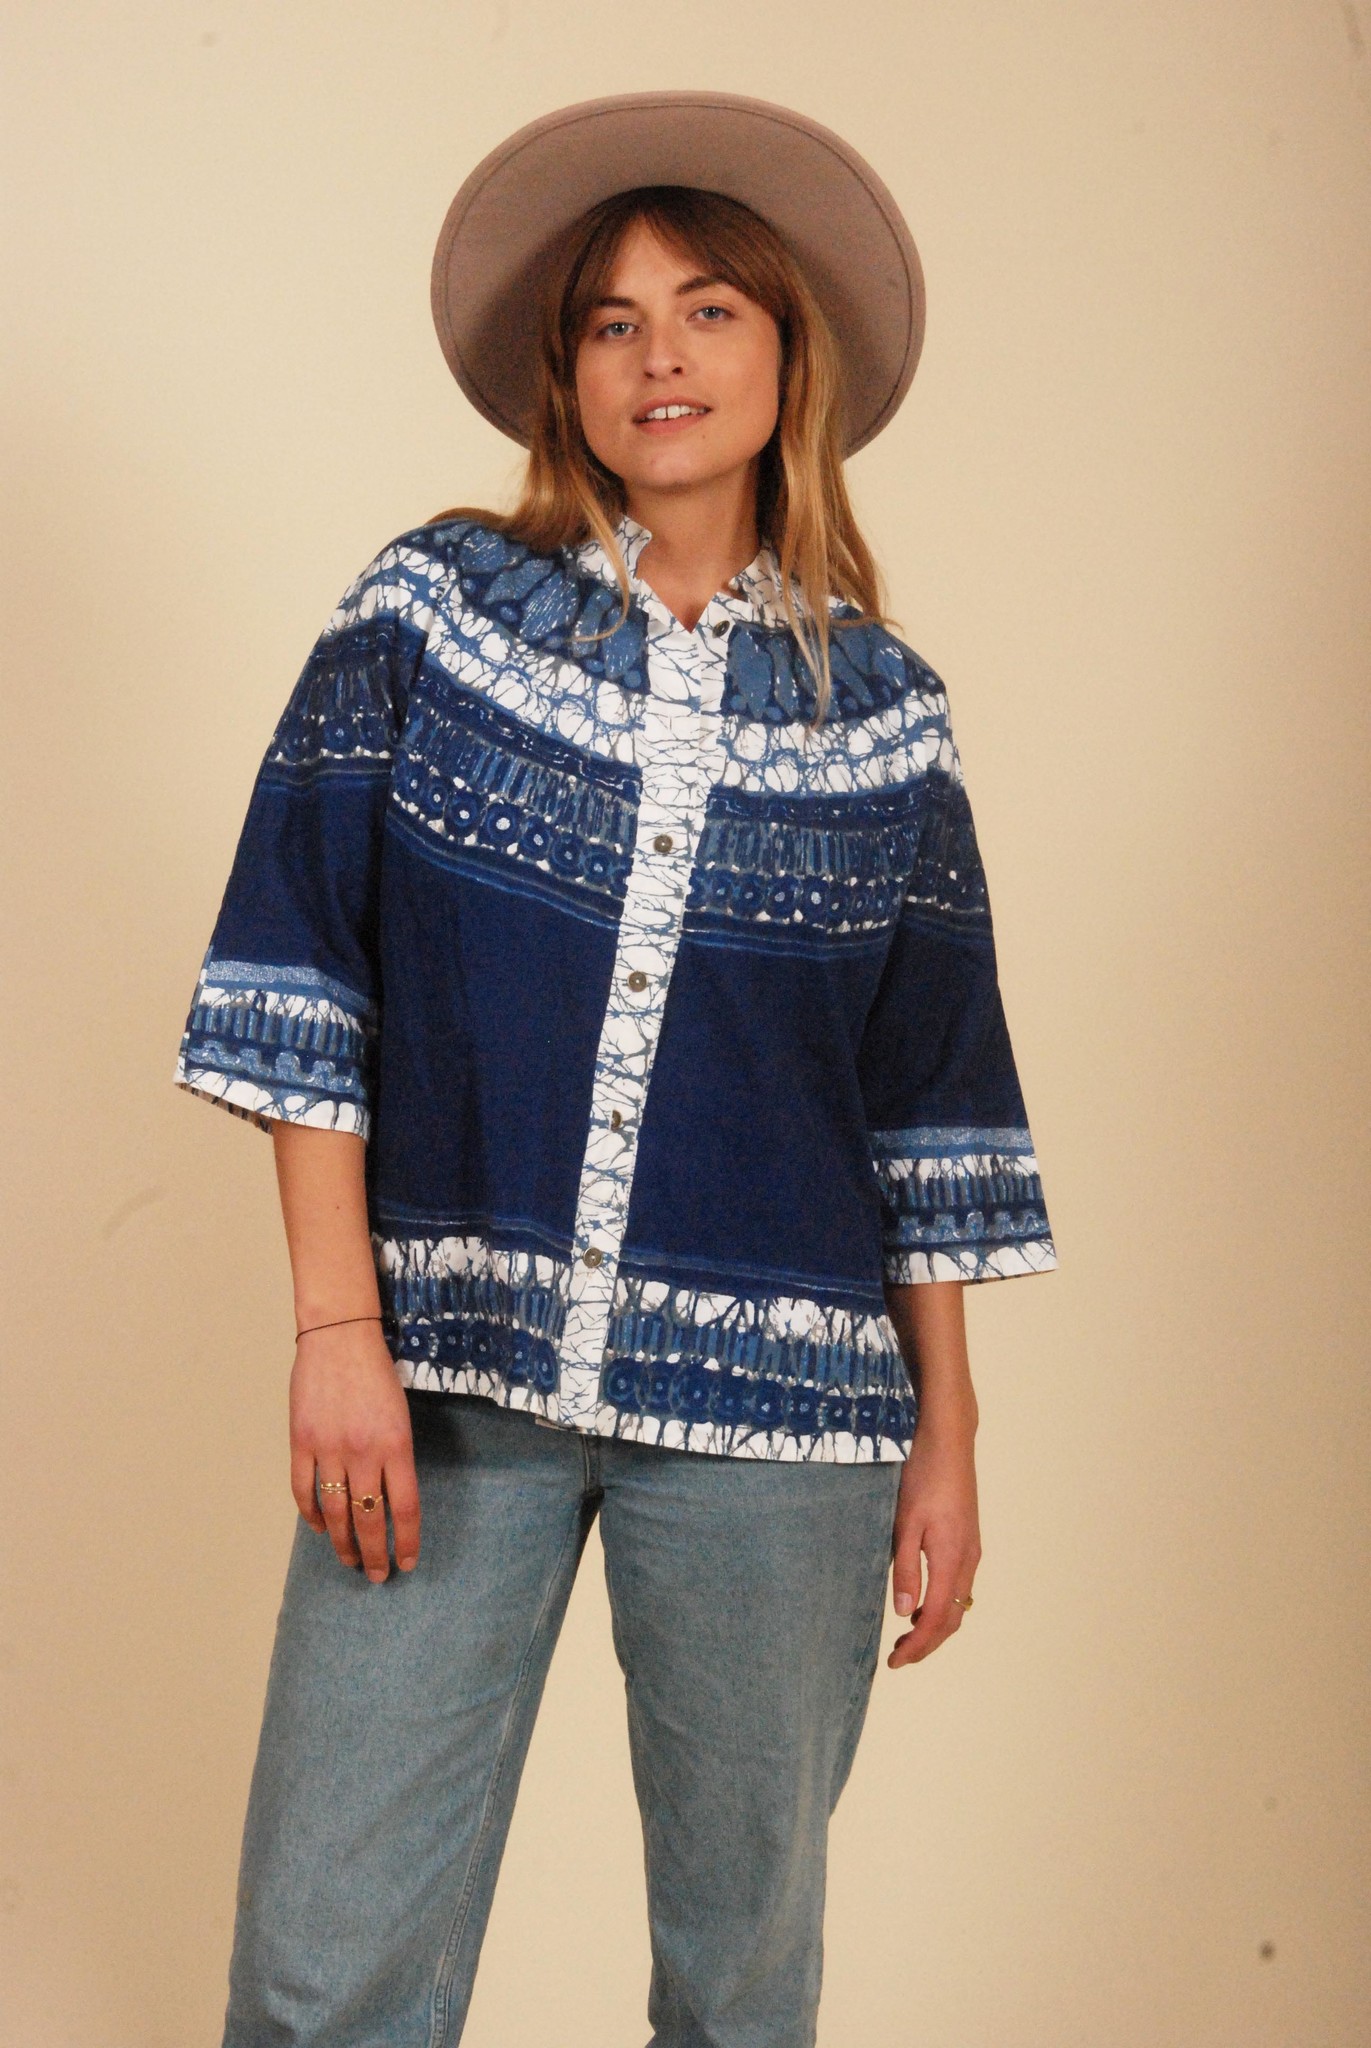 Blue 70s top with button front